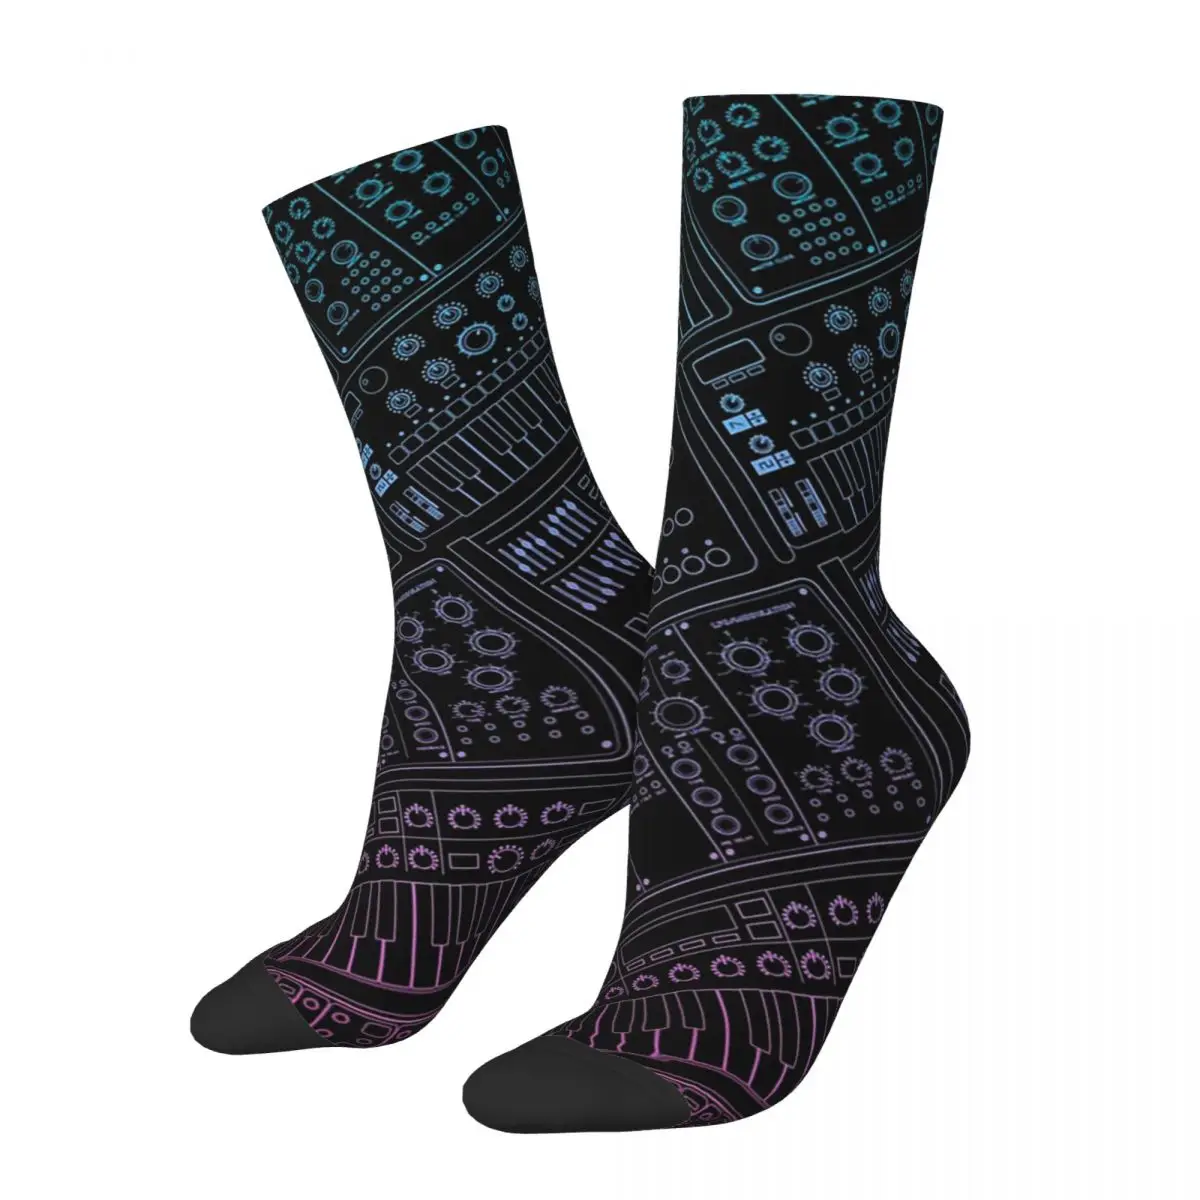 

Synthesizer For Dj And Electronic Musician Socks Harajuku Soft Stockings All Season Long Socks Accessories for Unisex Gifts